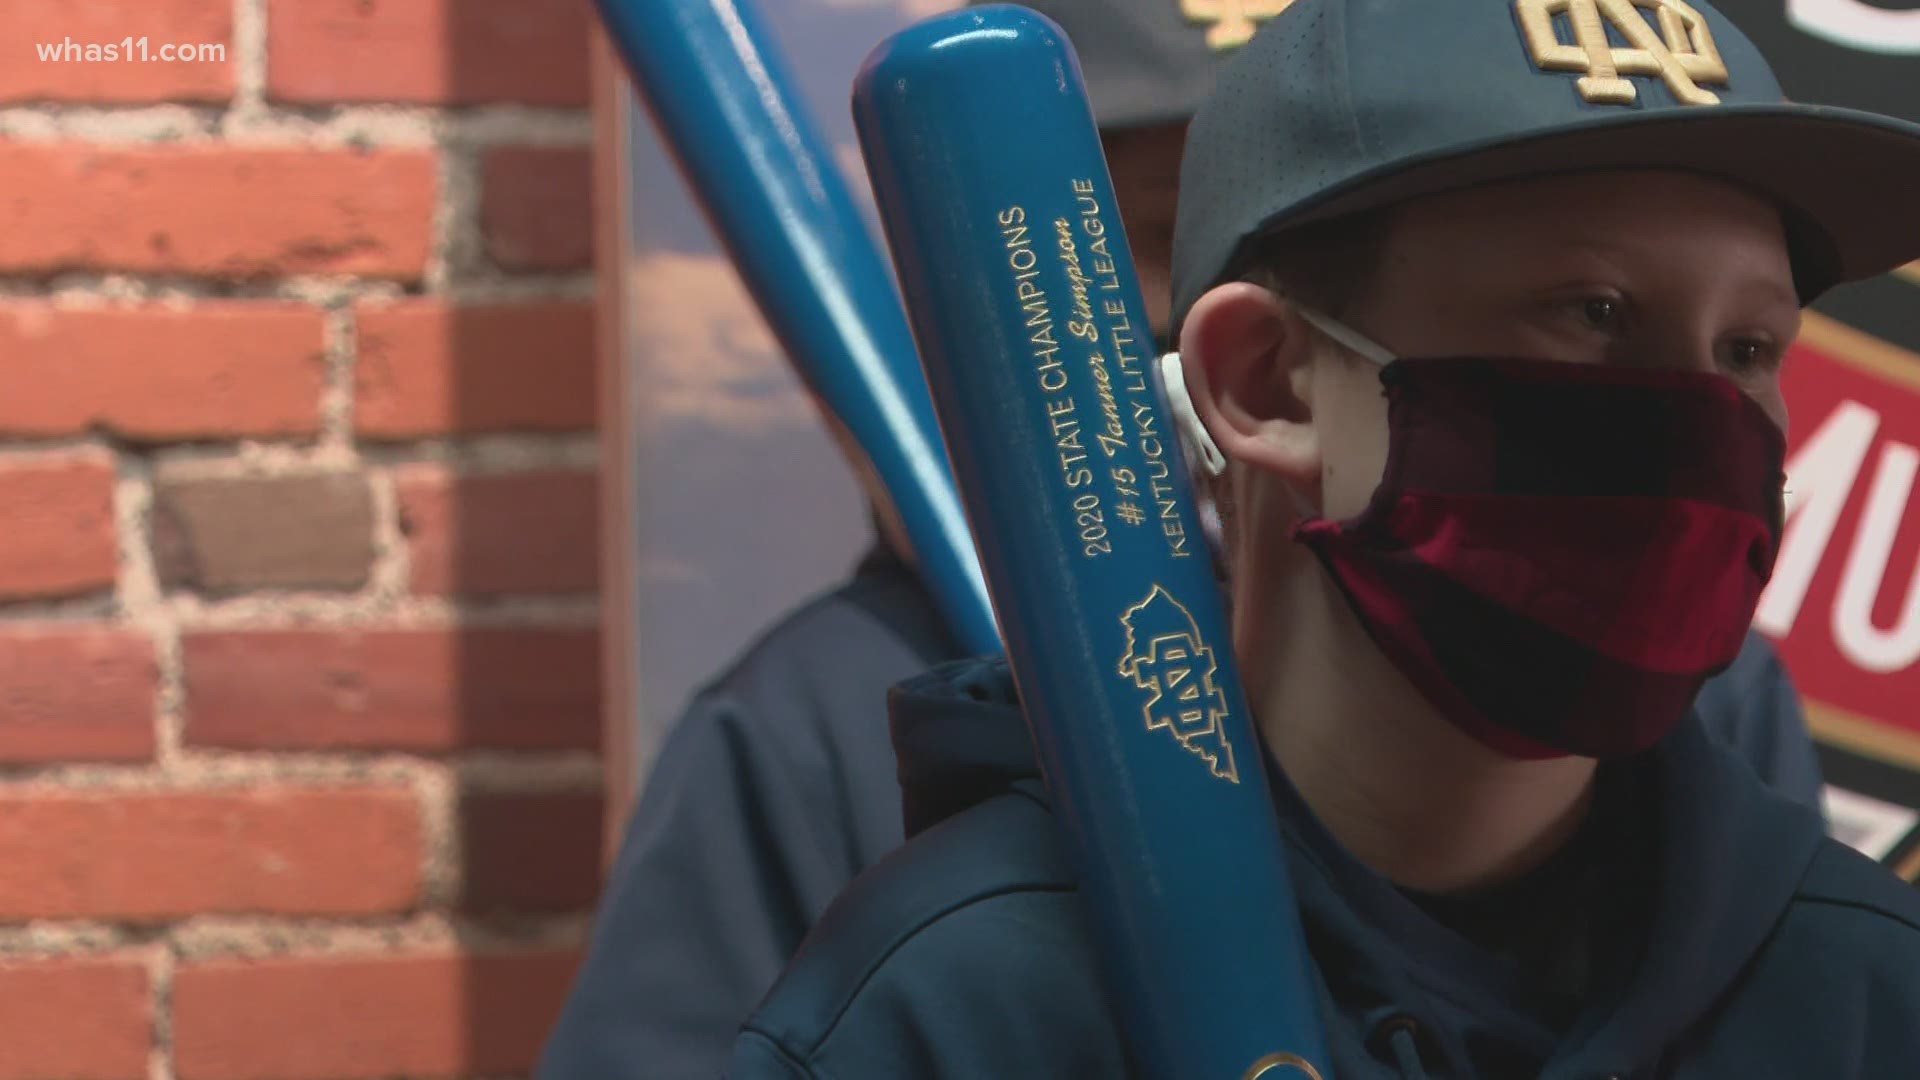 The bat company gave the team a surprise they will never forget after their opportunity to compete in the Little League World Series was cancelled.